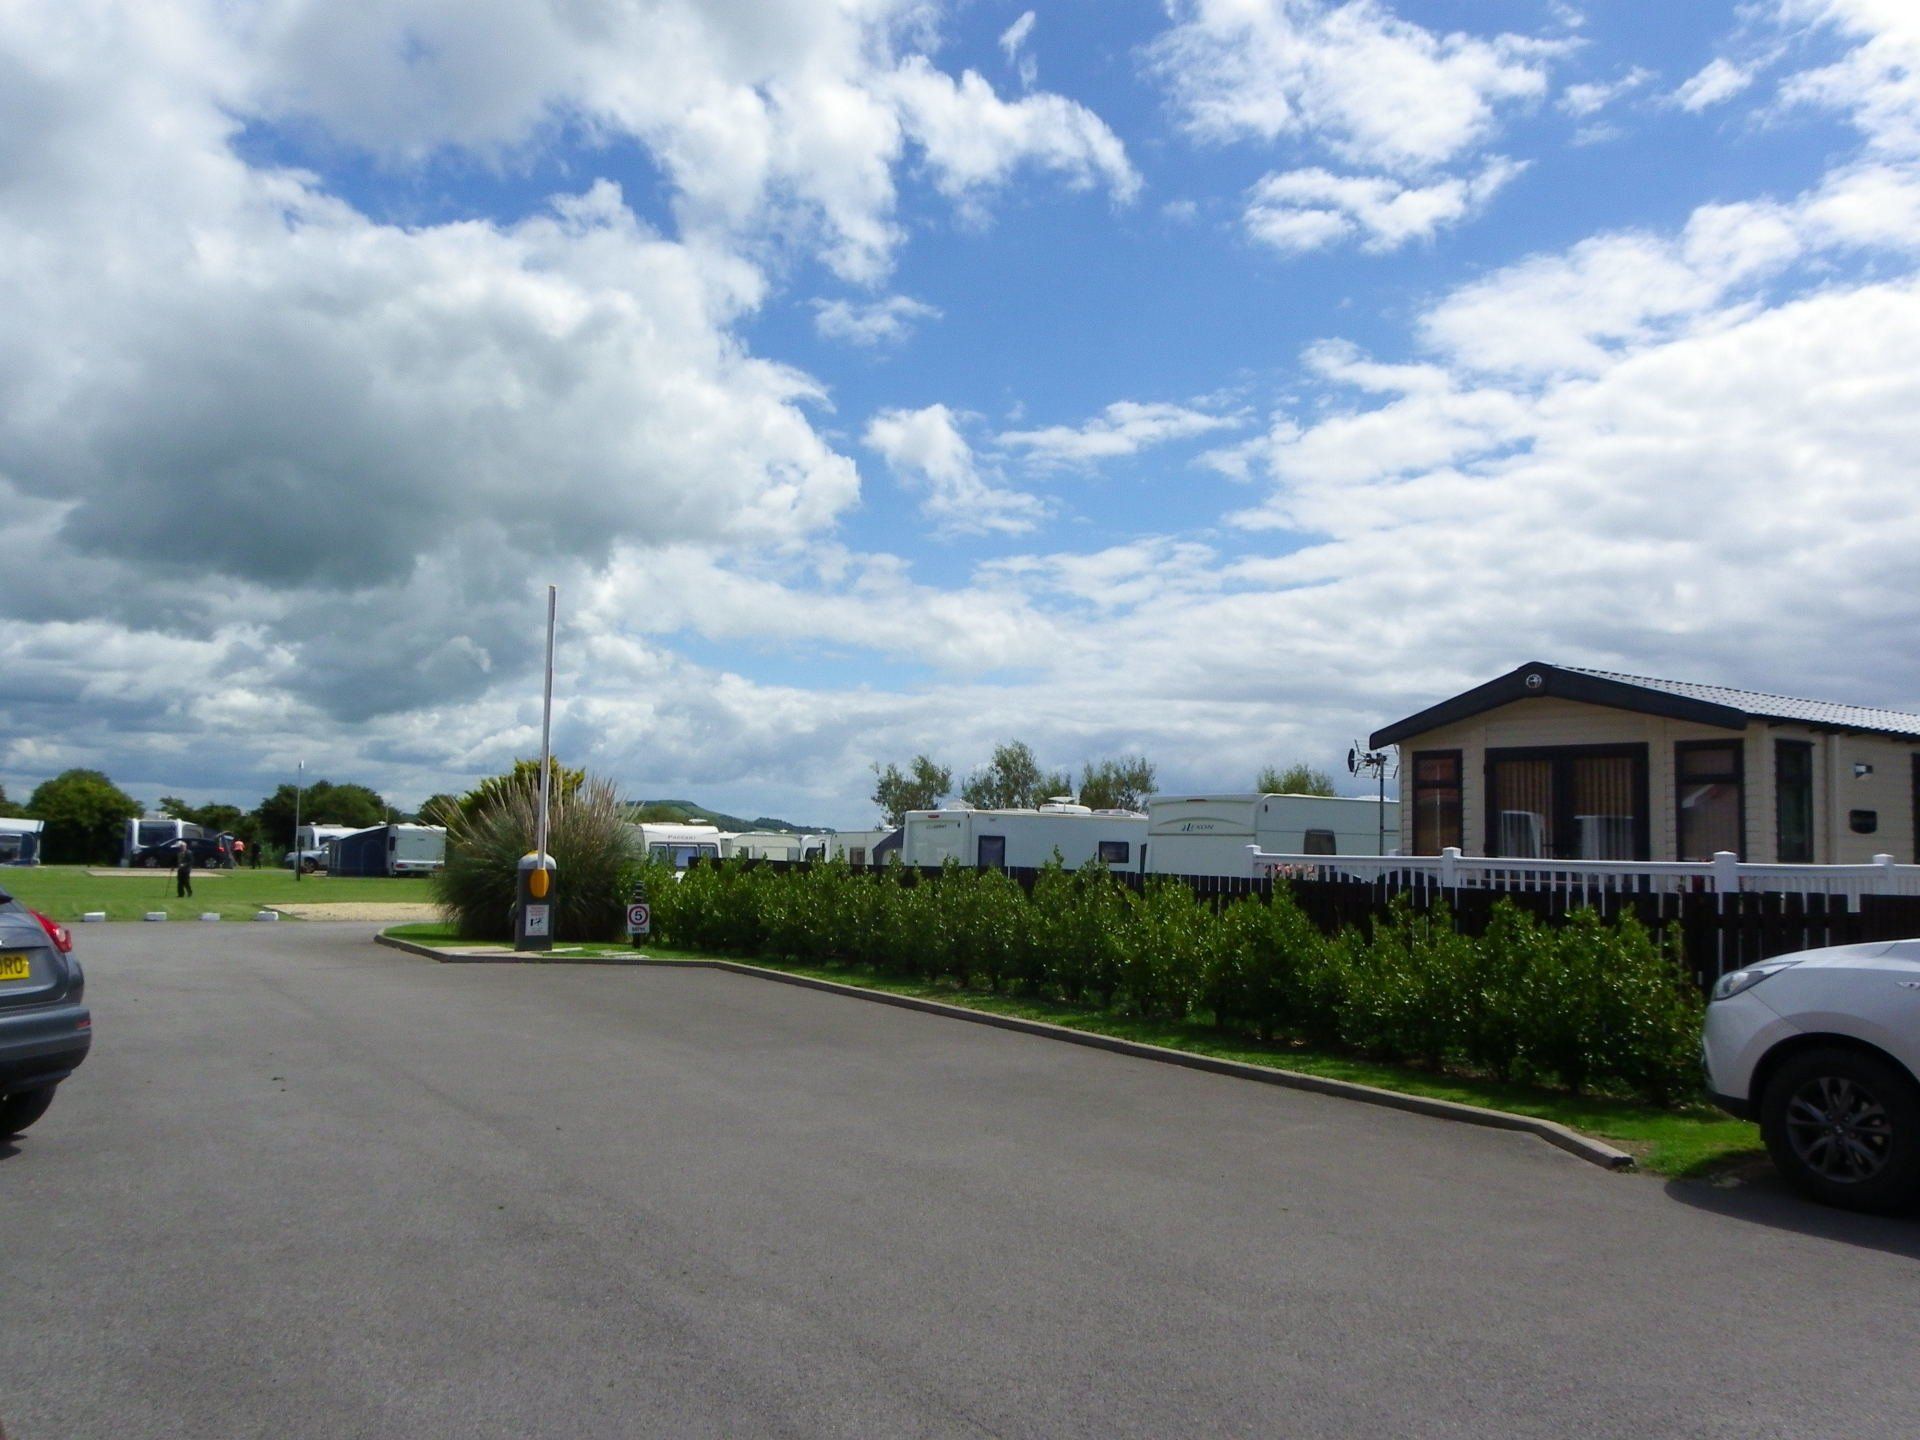 Caravans with awnings at Rose Farm Holiday Park.